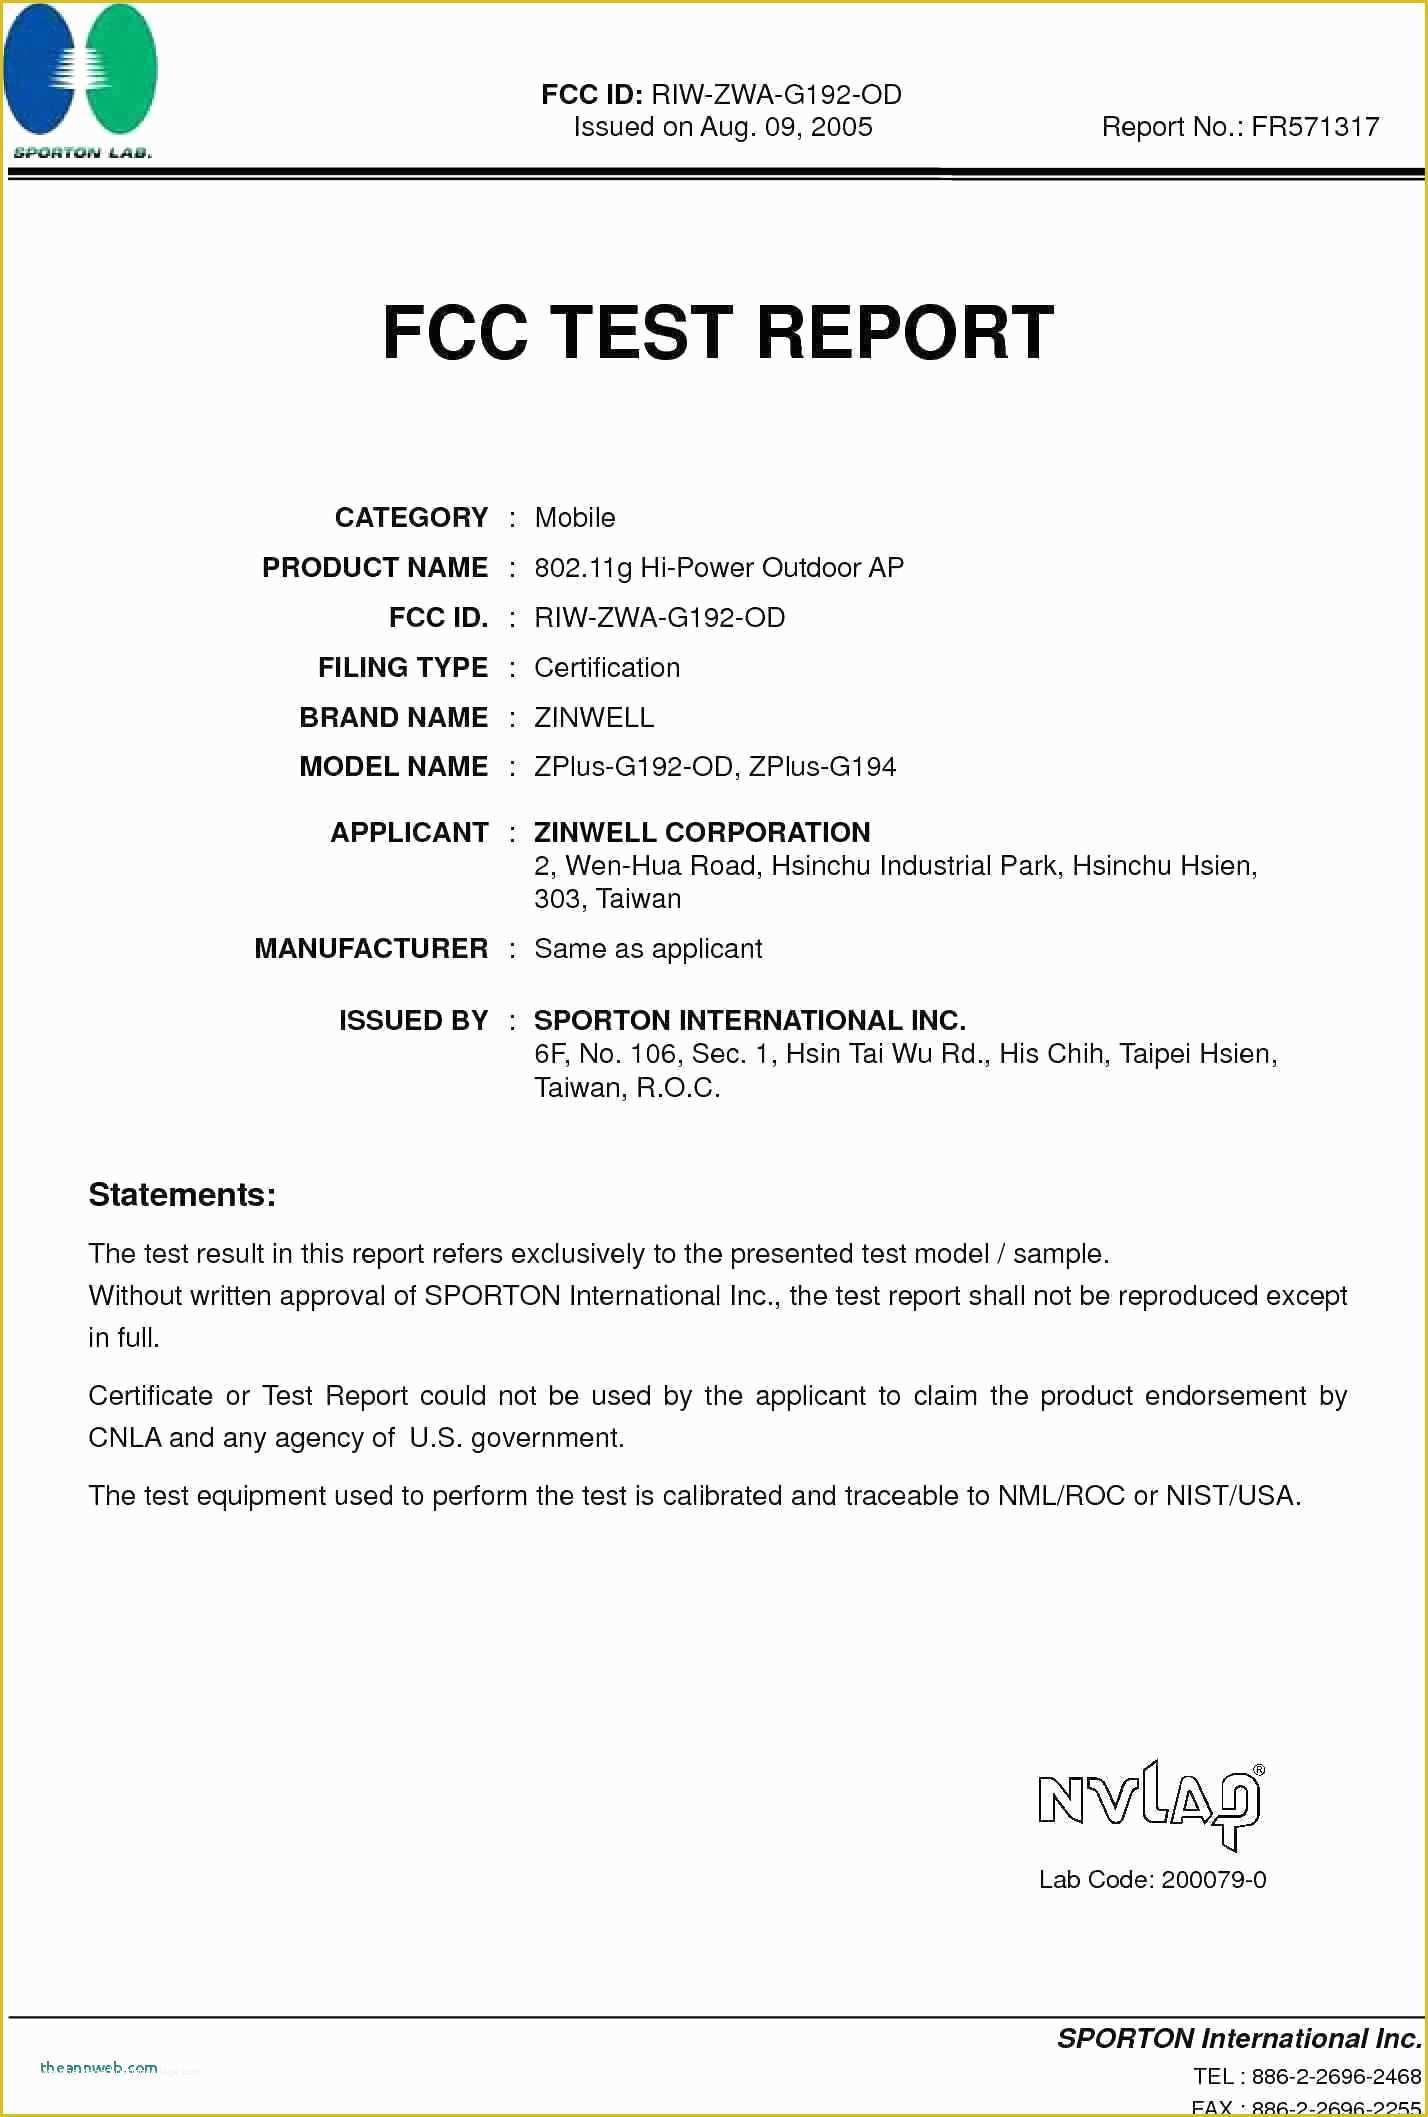 Free Resume Templates for Mac Of Download 43 Word Resume Template Mac Simple